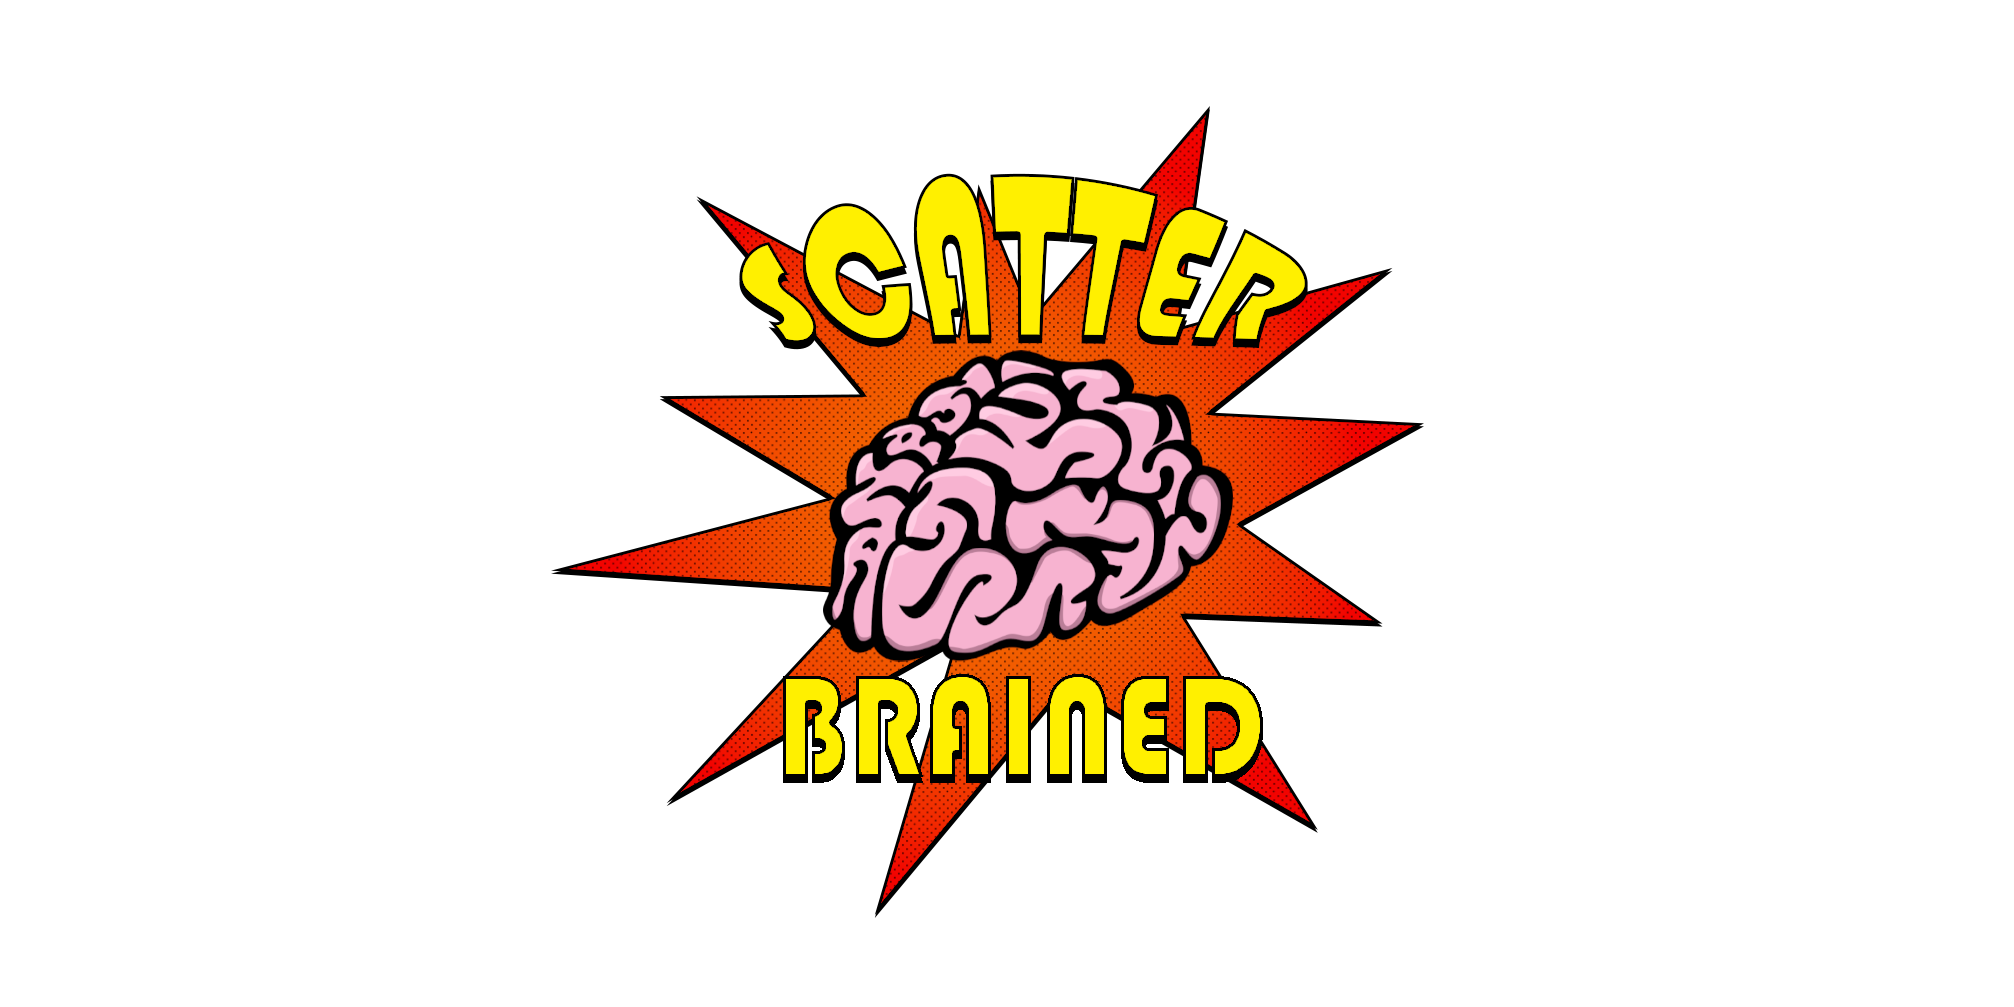 Scatterbrained – Episode 0 – The Pilot